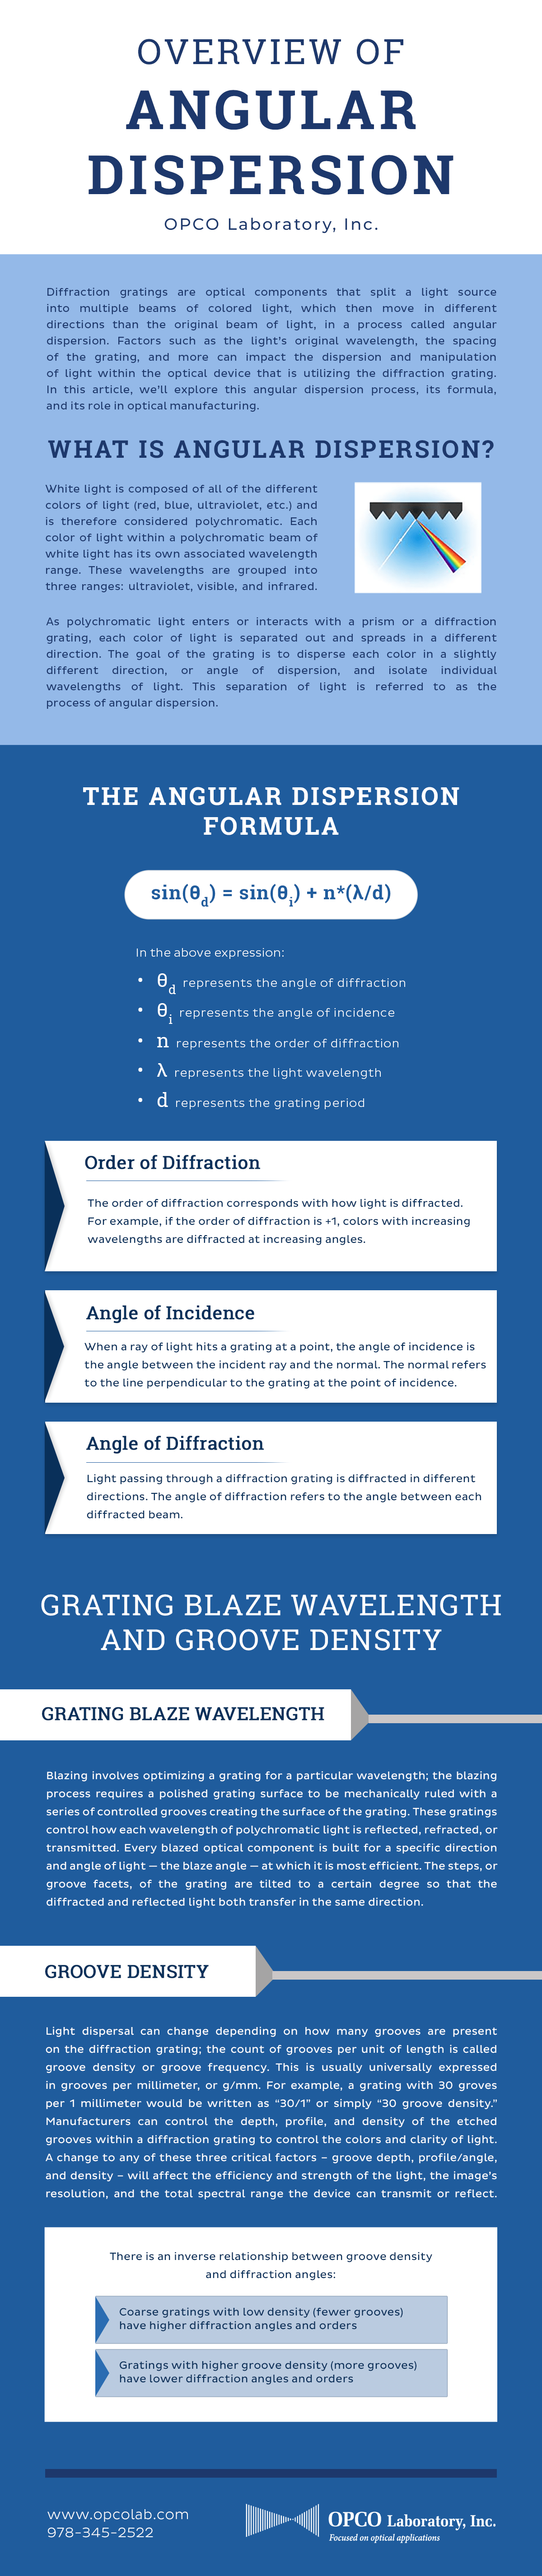 Overview Of Angular Dispersion